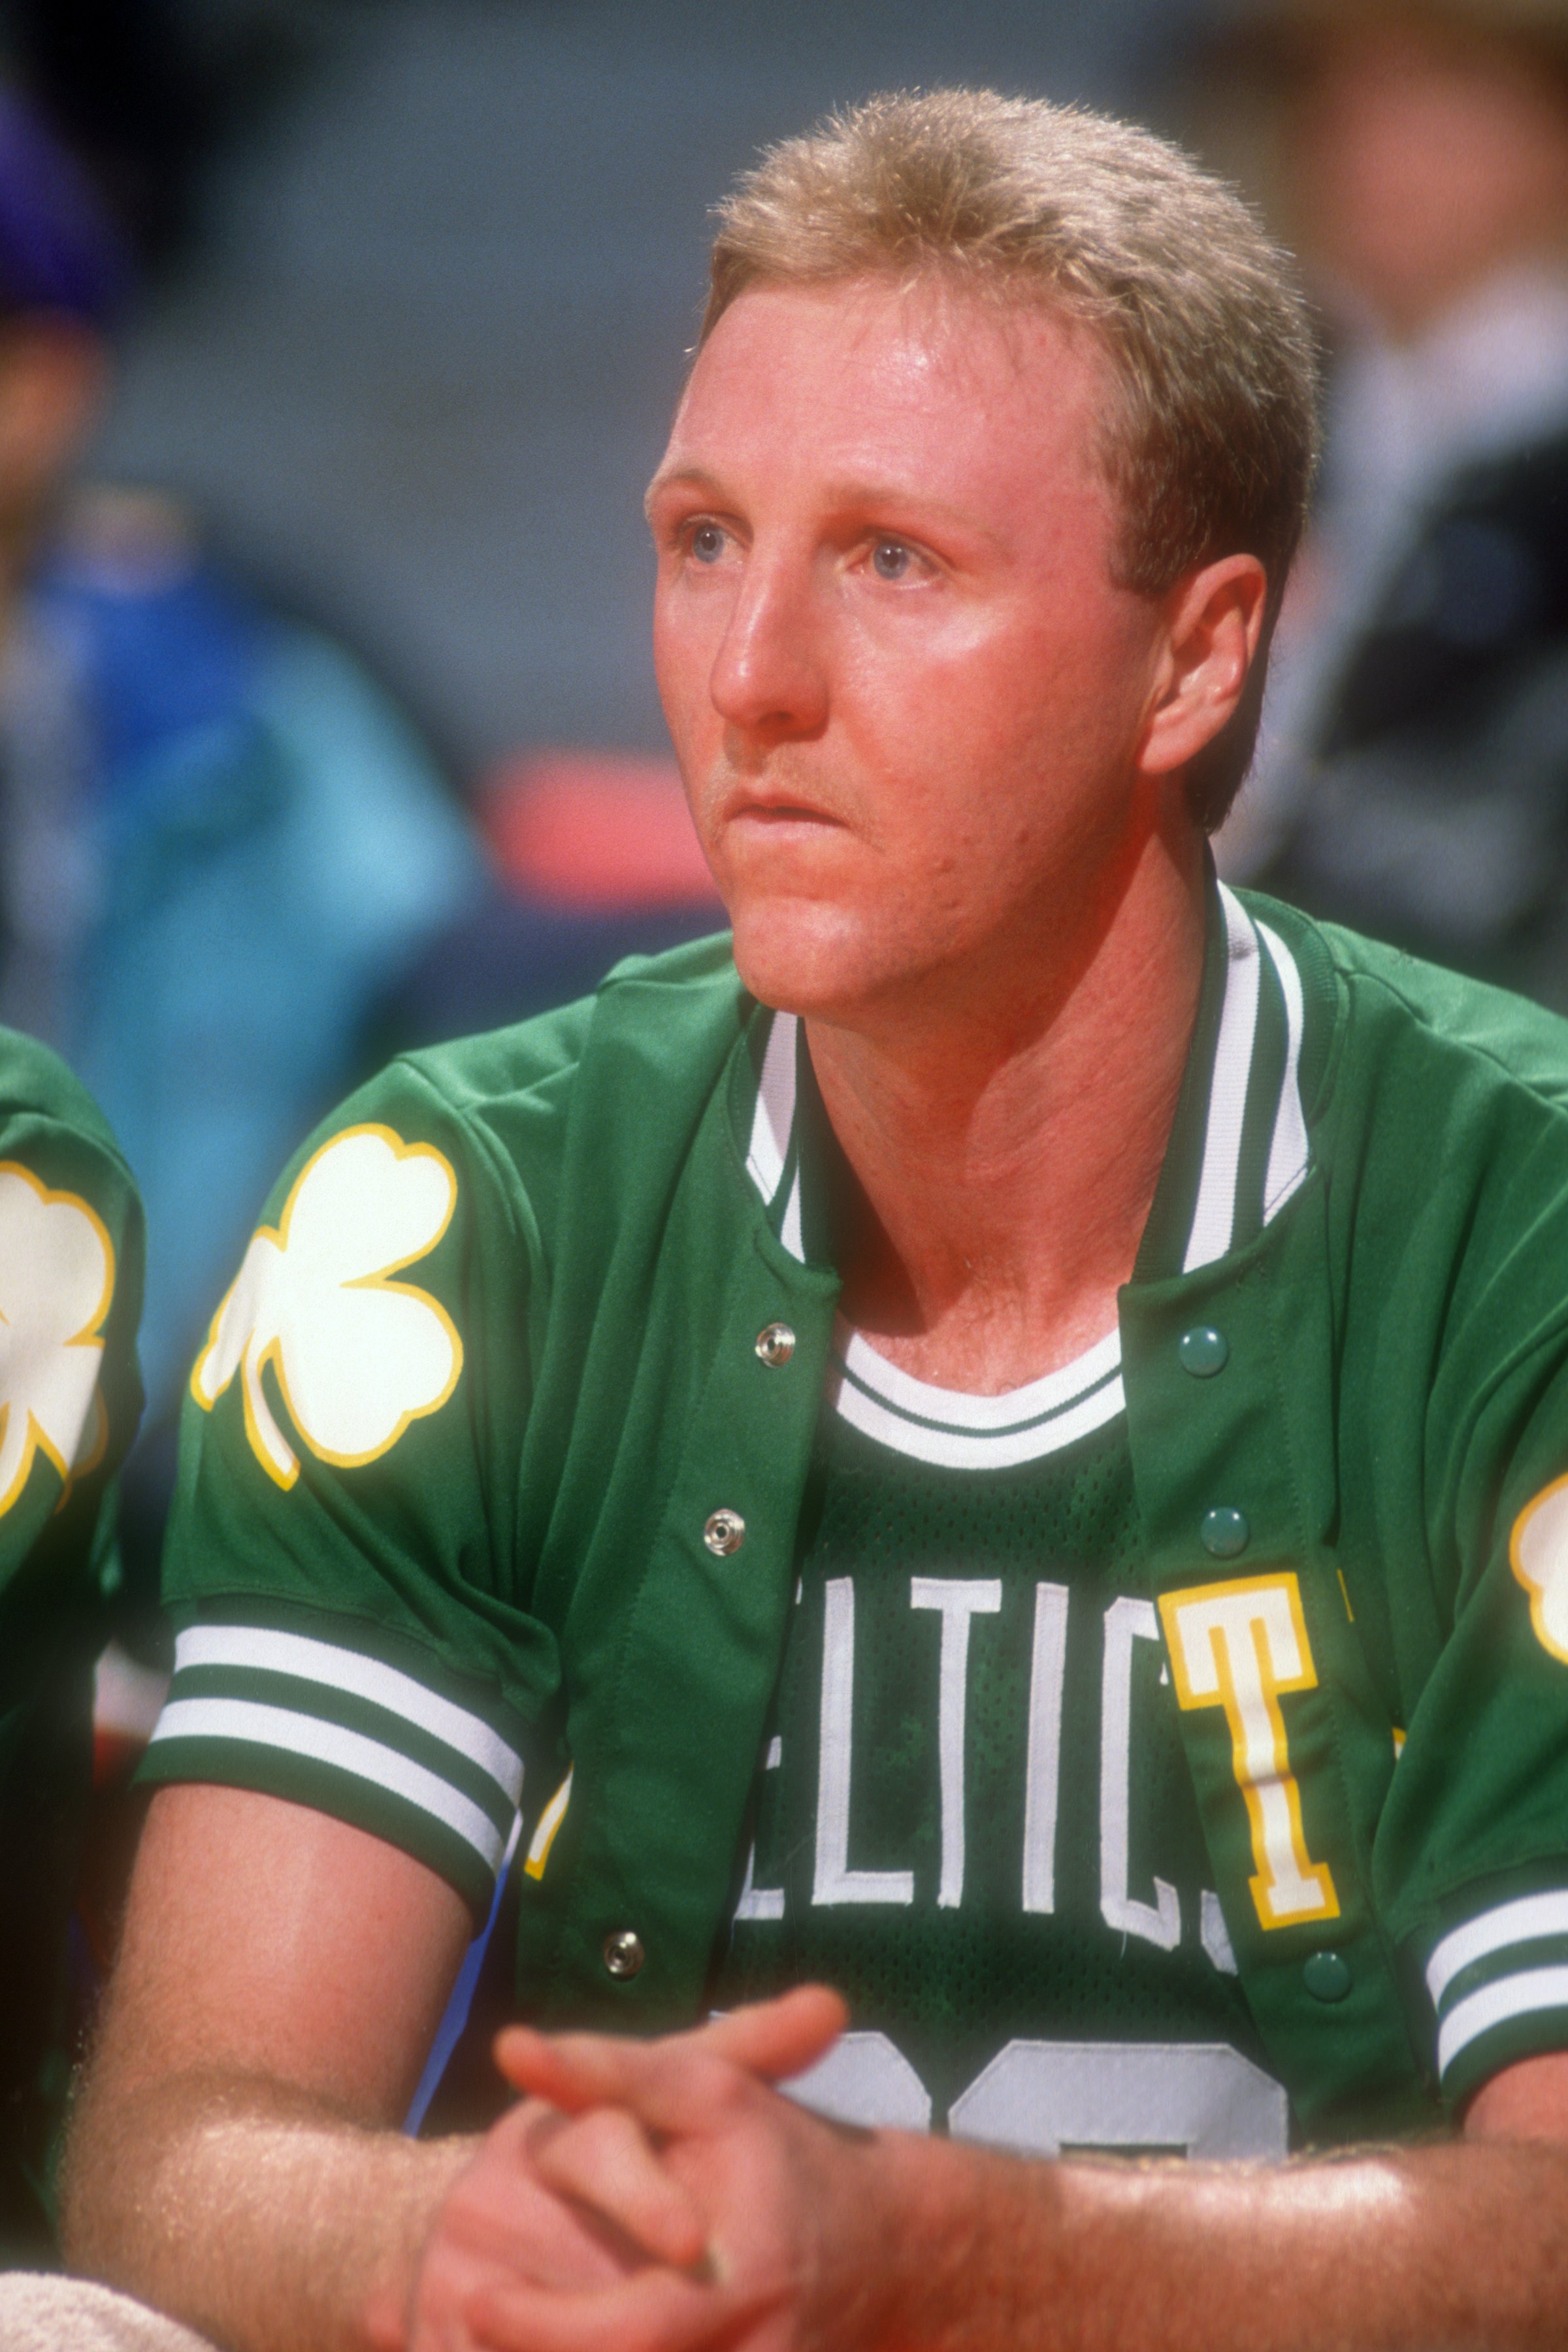 Larry Bird of the Boston Celtics watches the team's game against the Washington Bullets at the Capital Centre on January 12, 1991, in Landover, Maryland. | Source: Getty Images